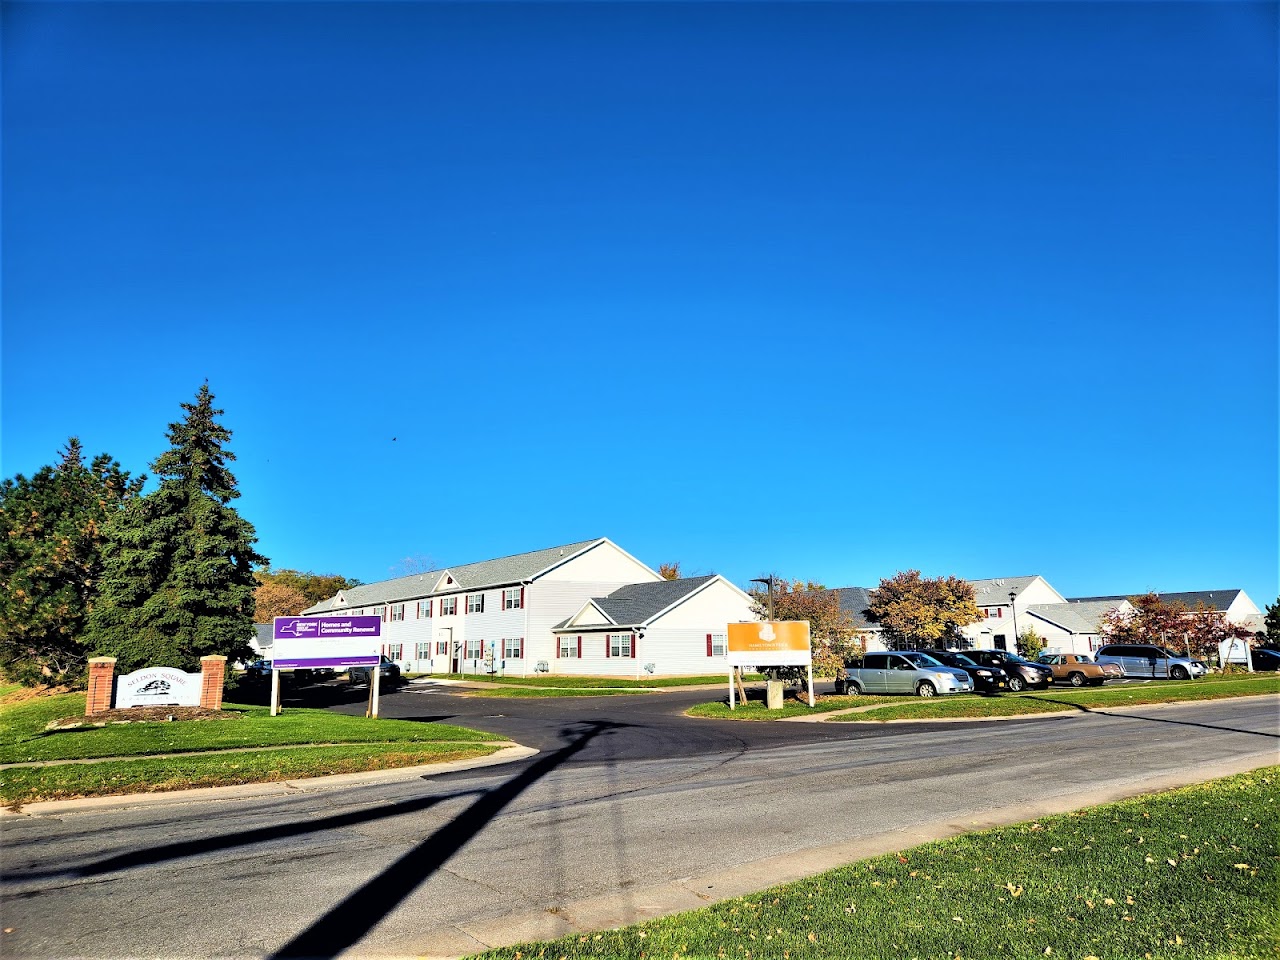 Photo of SELDON SQUARE. Affordable housing located at 99 SUNSET CTR LN BROCKPORT, NY 14420